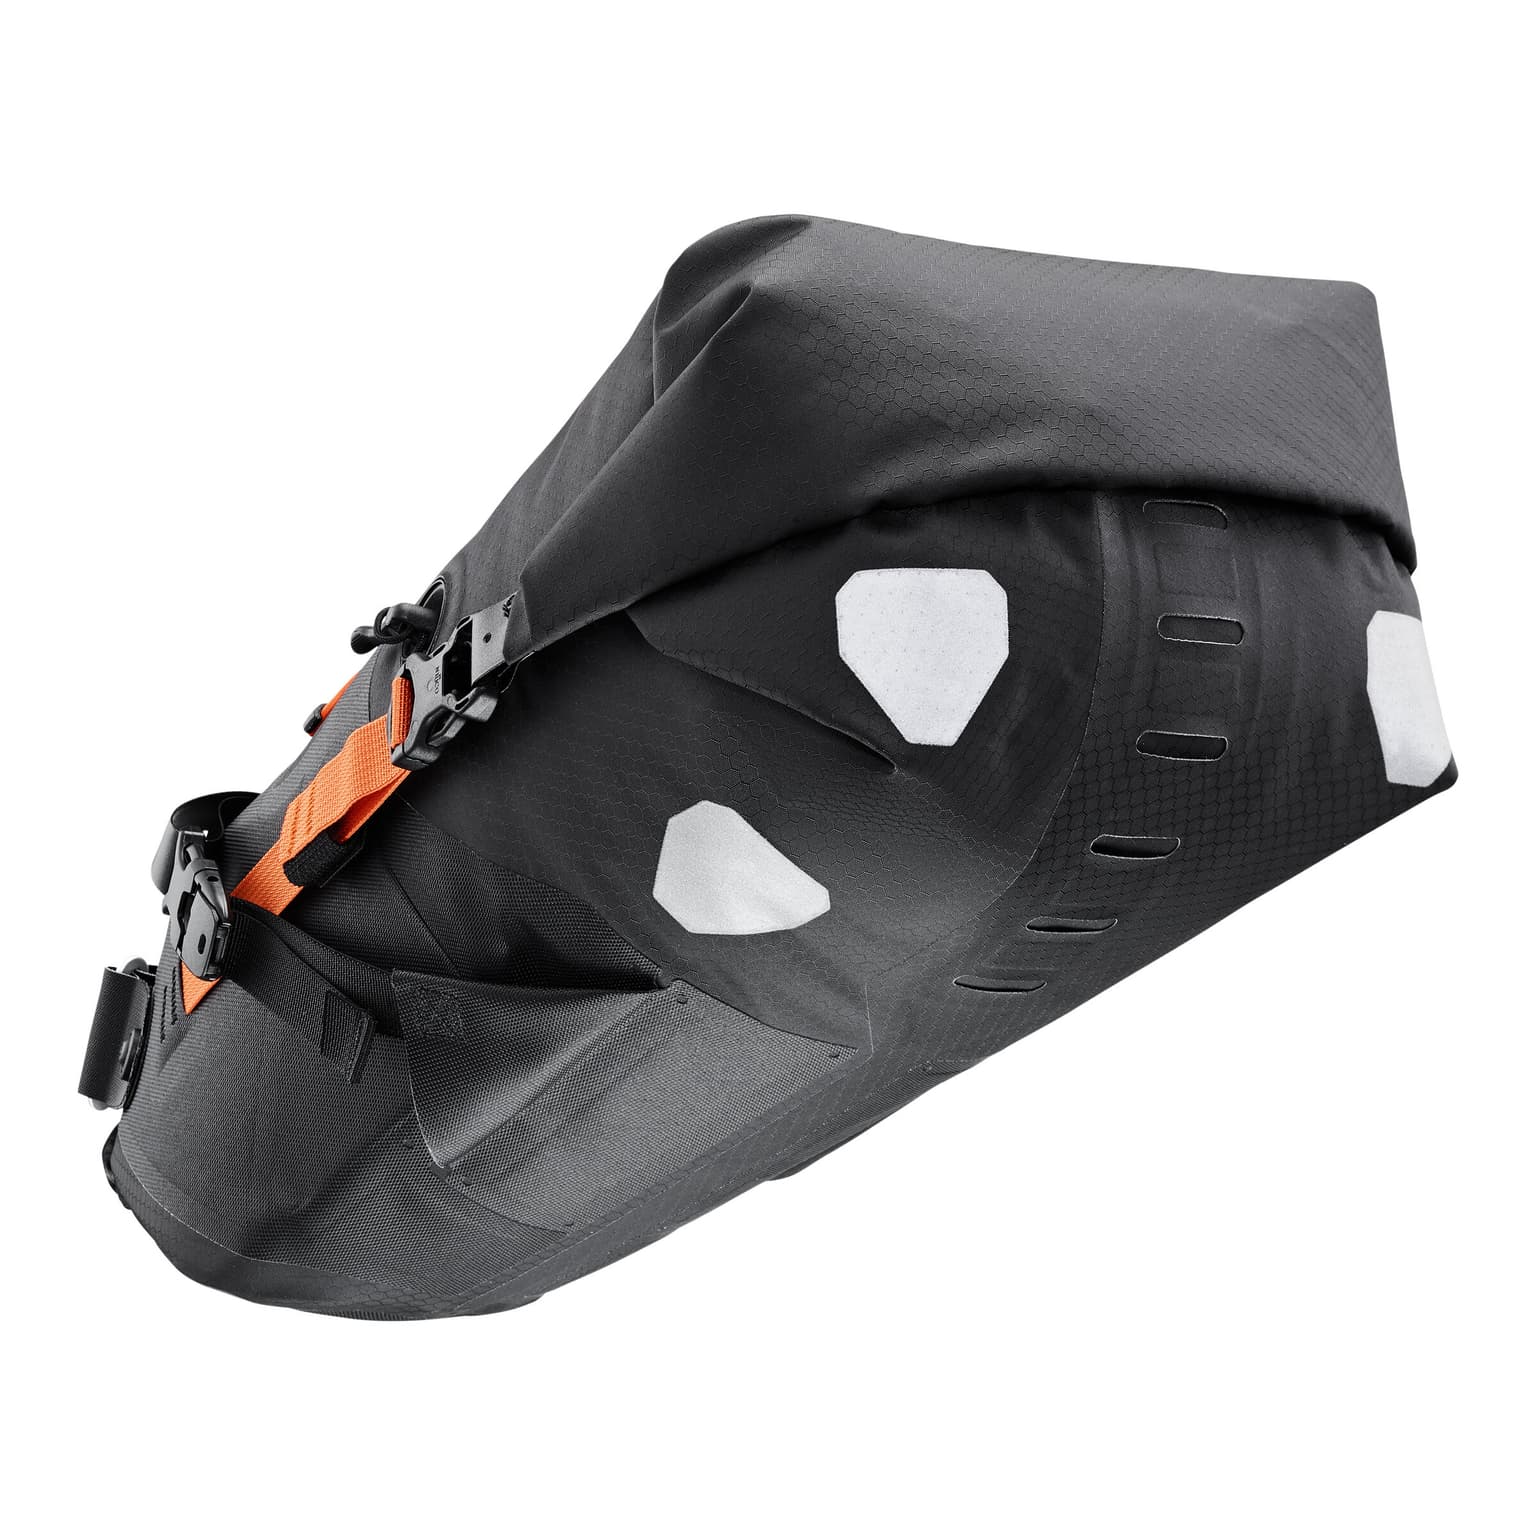 Ortlieb Ortlieb Seat Pack 11l Sacoche pour vélo 2